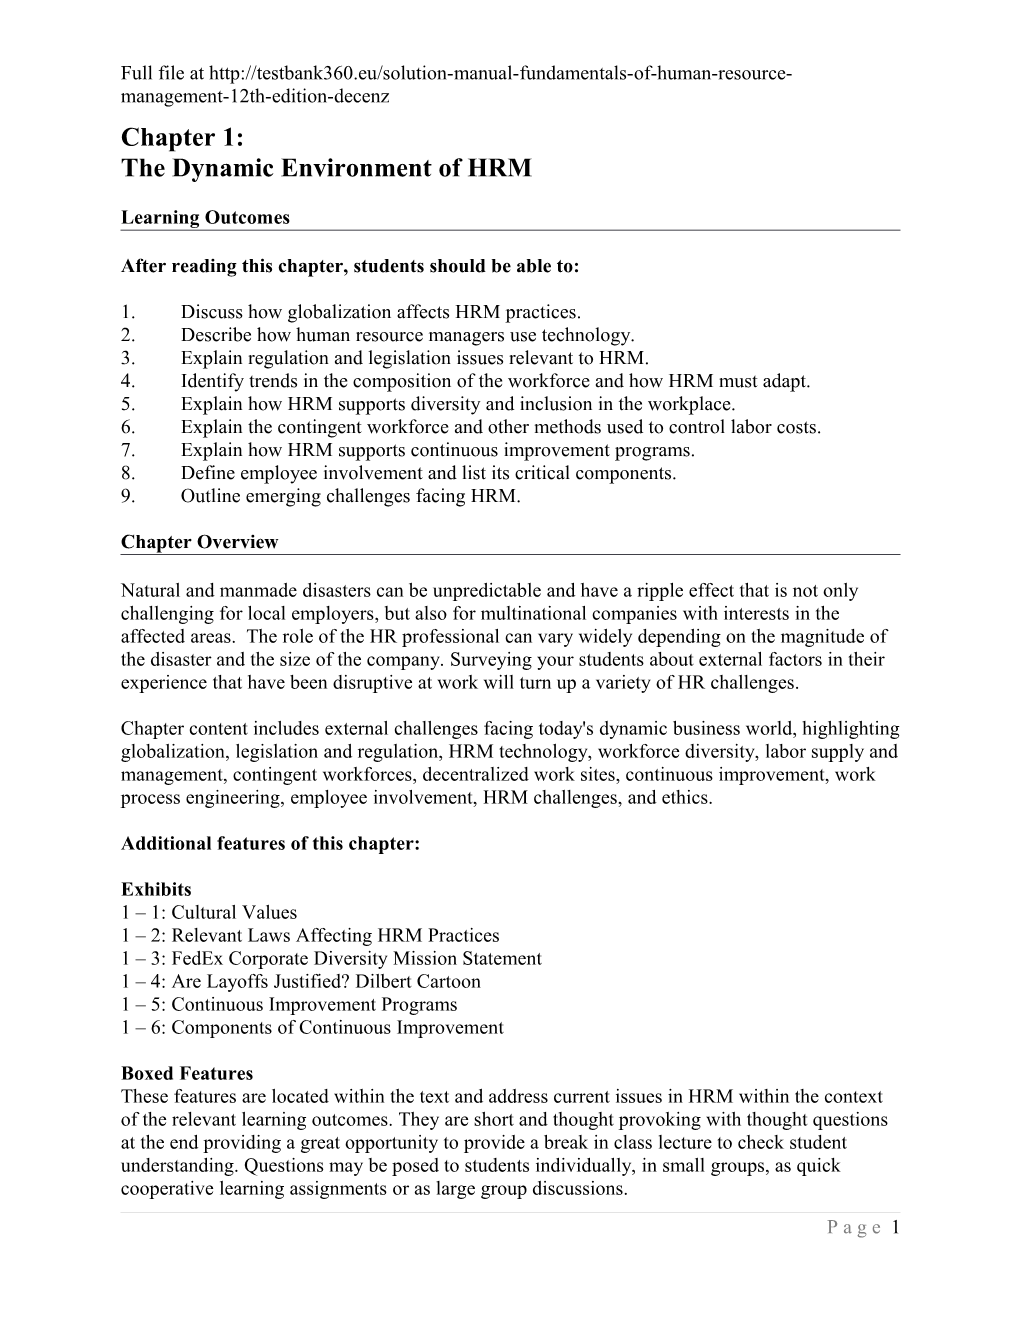 The Dynamic Environment of HRM